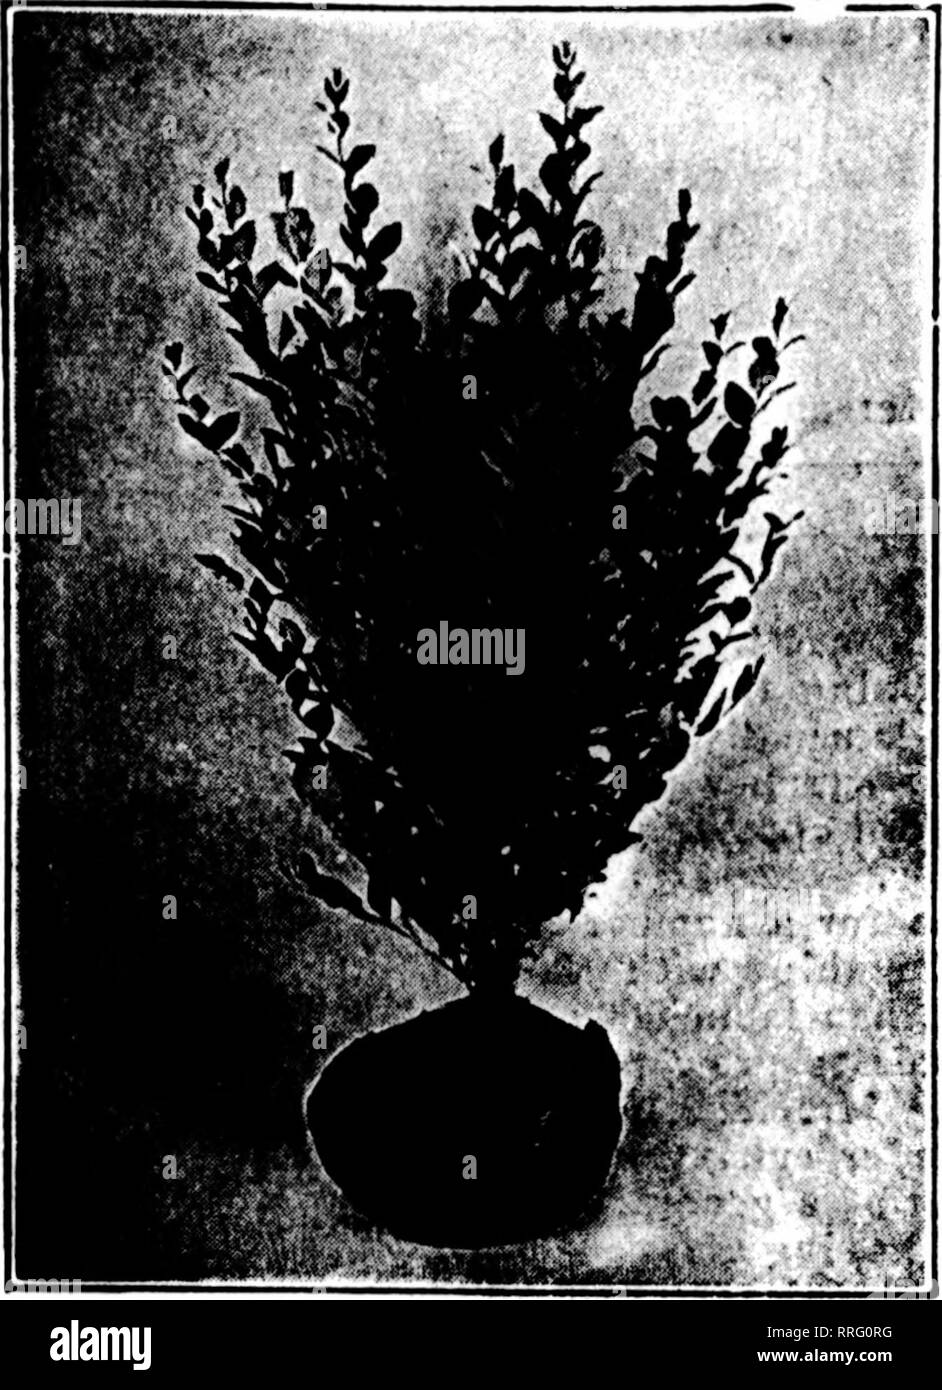 . Florists' review [microform]. Floriculture. November 18, 1920 The Florists*' Review 129 HARDY PRIVET We have the largest stock of Hardy Amoor River North Privet left in the United States. We can furnish all gradea, also, of AmpelopsM Veitchii, 2 or 3-year. Clematit, assorted. Spiraea Anthony Waterer. Hydrangeas. Roses. Shade Trees and Ornamentals. Write for Price LUt Onarga Nursery Company CULTRA BROS., Managera ONARGA, . - ILLINOIS Evergreens, Peonies and Iris If ron are Intereated In the«e yoB are inter- ested In U8, aa we have a nice lot for early fall delivery. We also grow a full line o Stock Photo